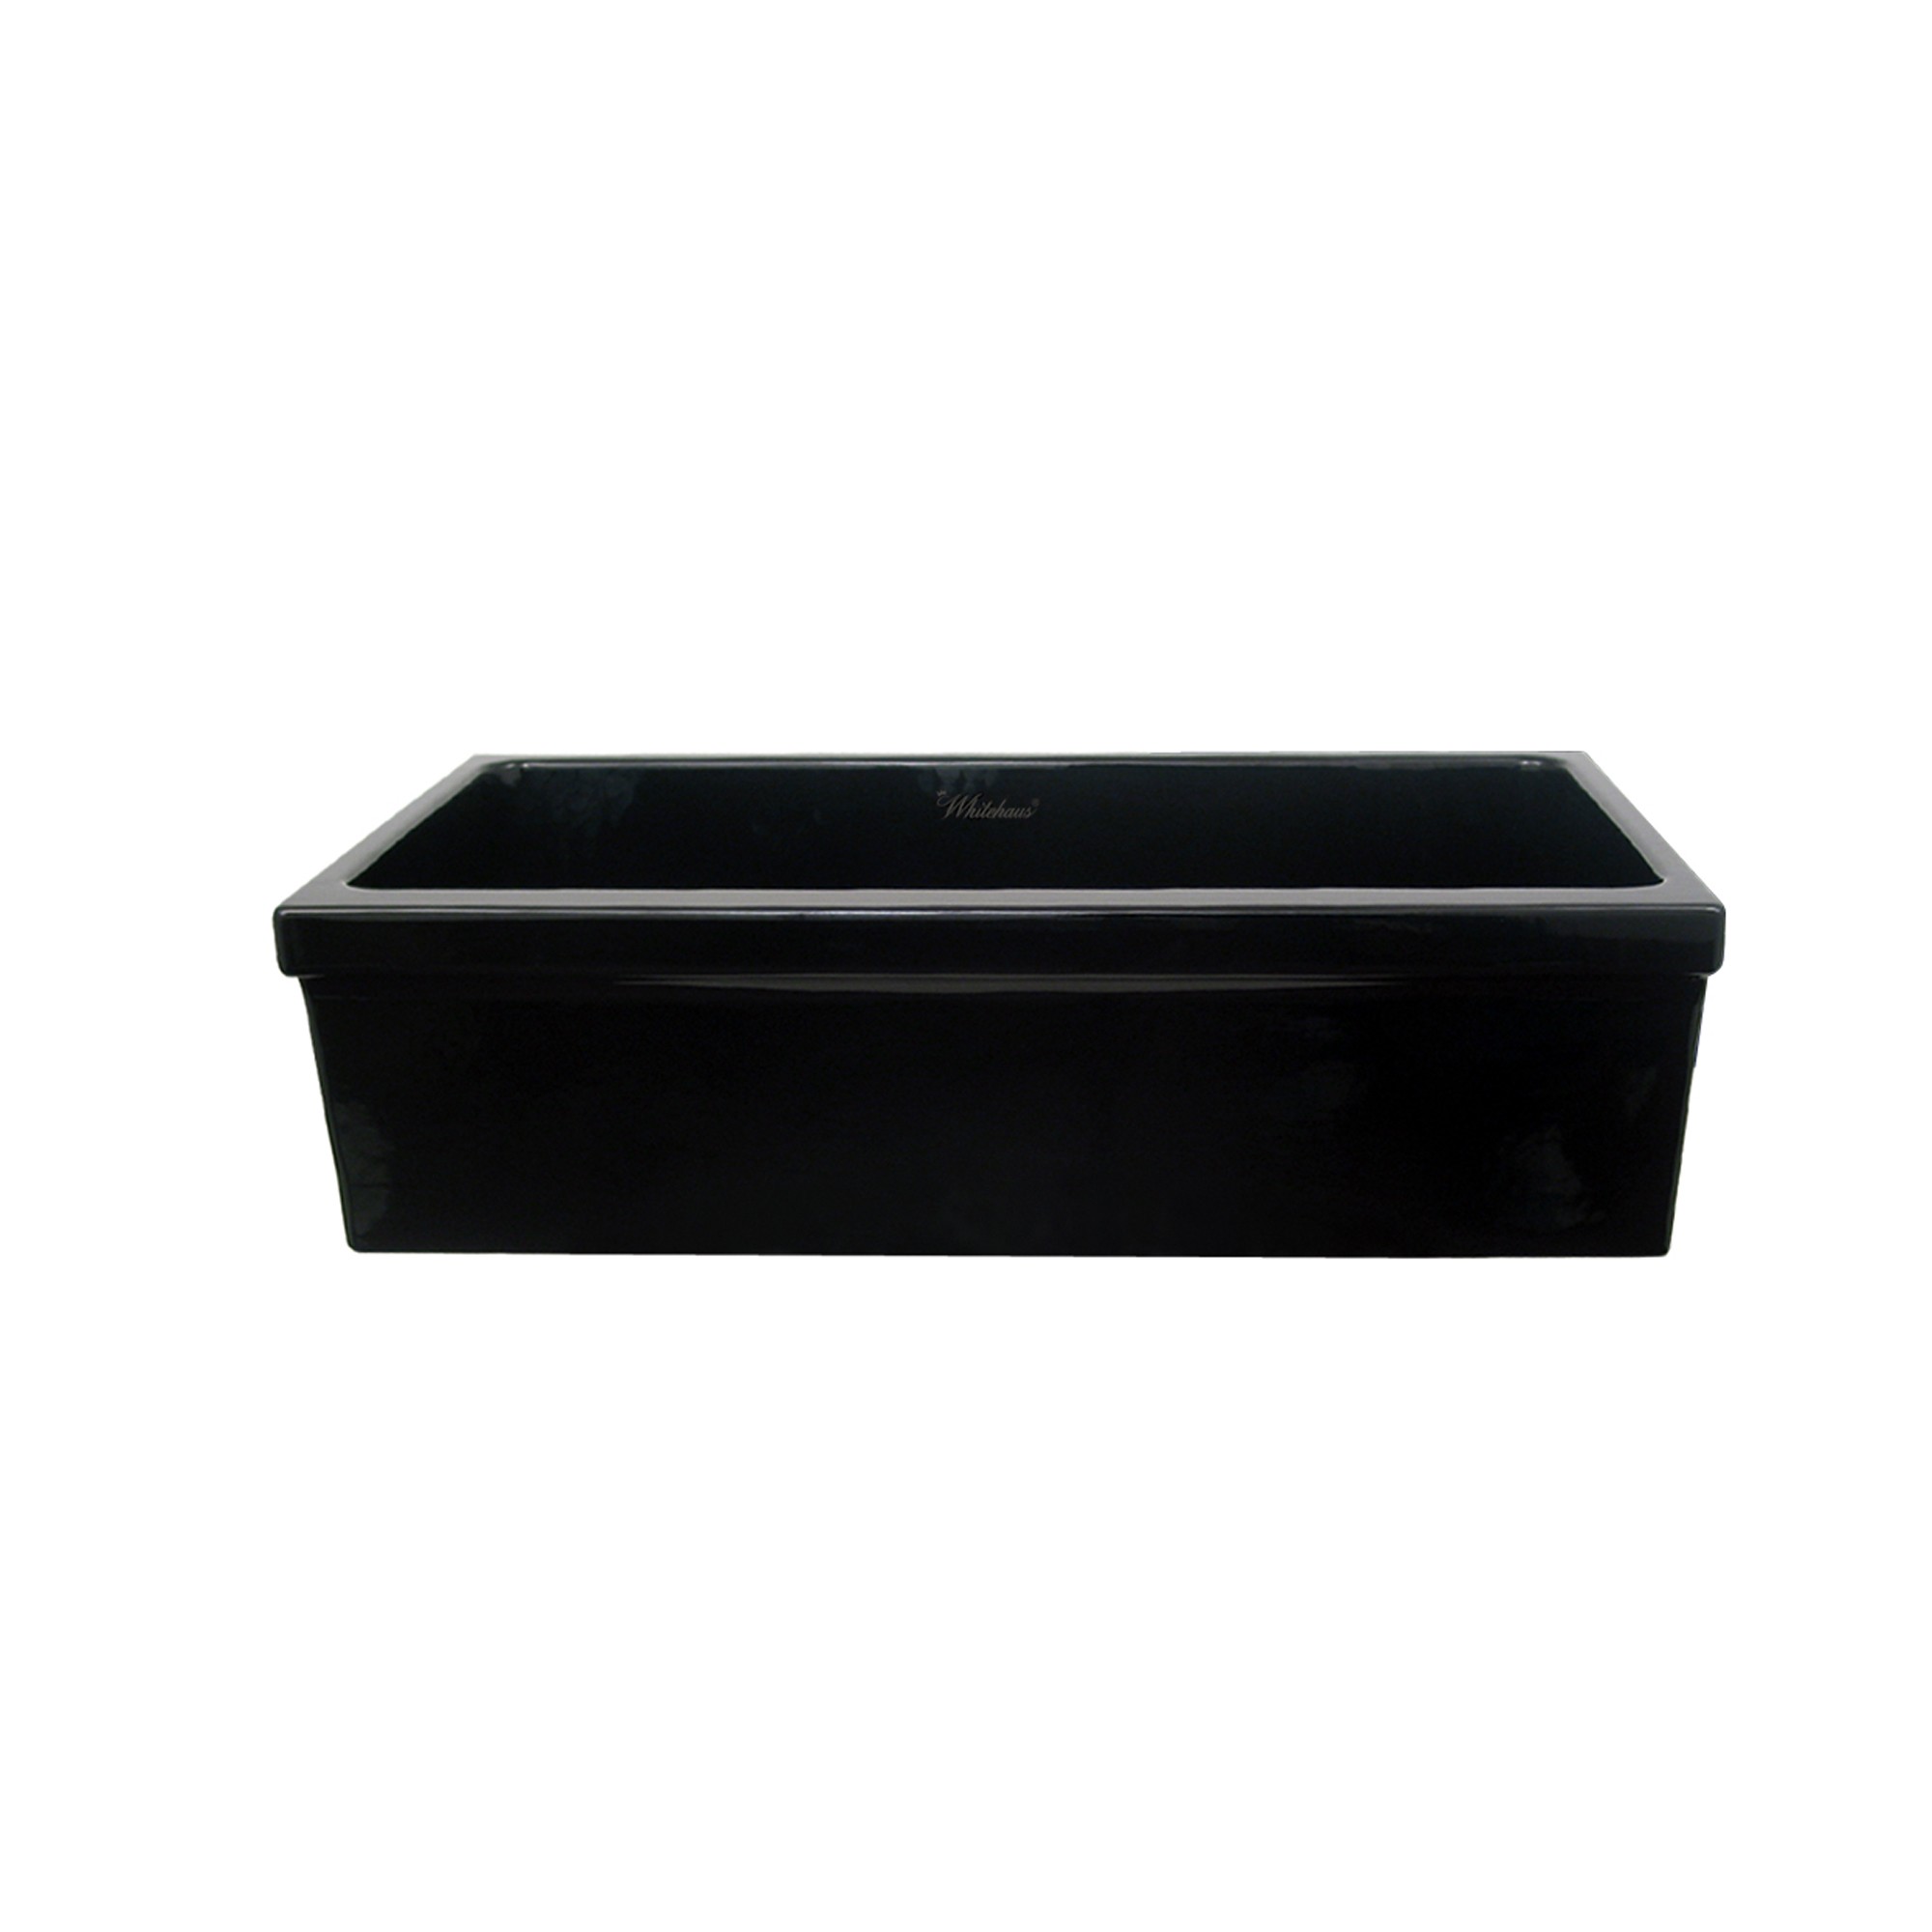 Farmhaus Fireclay Quatro Alcove Large Reversible Sink with Decorative 2 +" Lip on One Side and 2" Lip on the Opposite Side